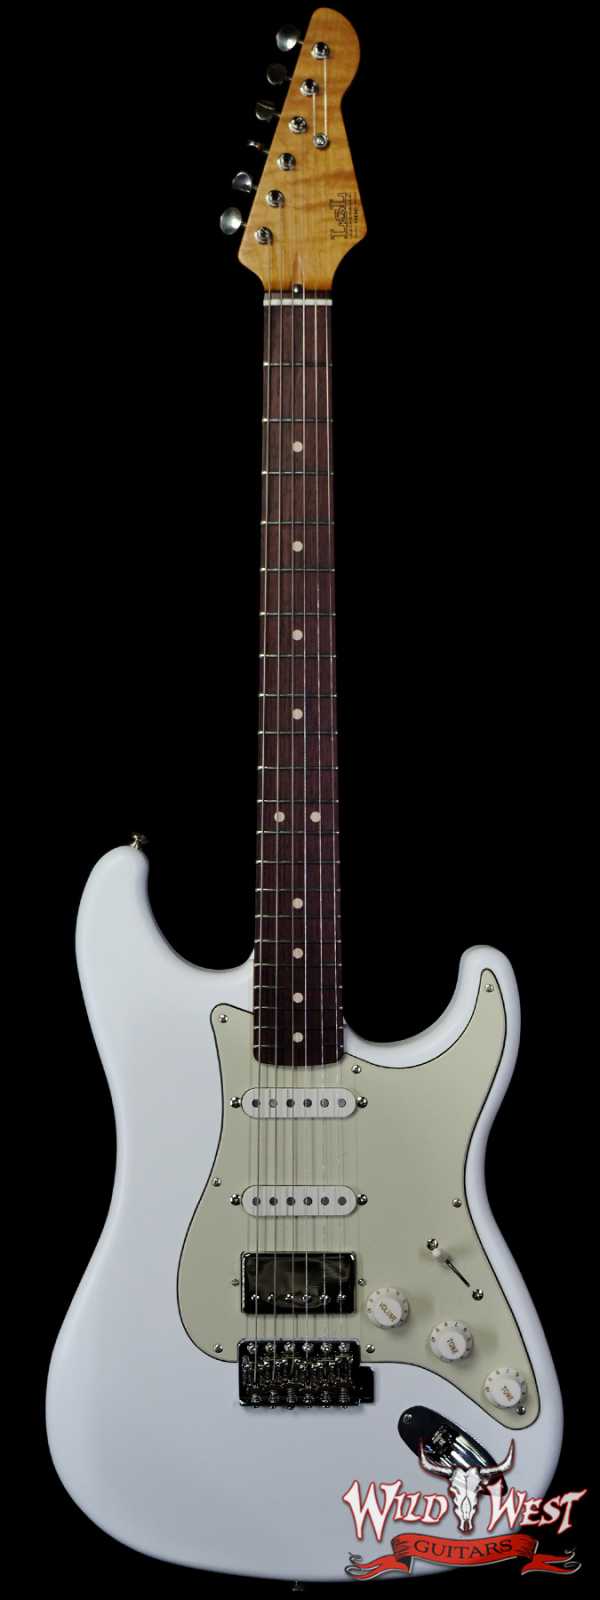 LsL Saticoy One B S Style HSS Roasted Maple Neck Rosewood Fingerboard Vintage White